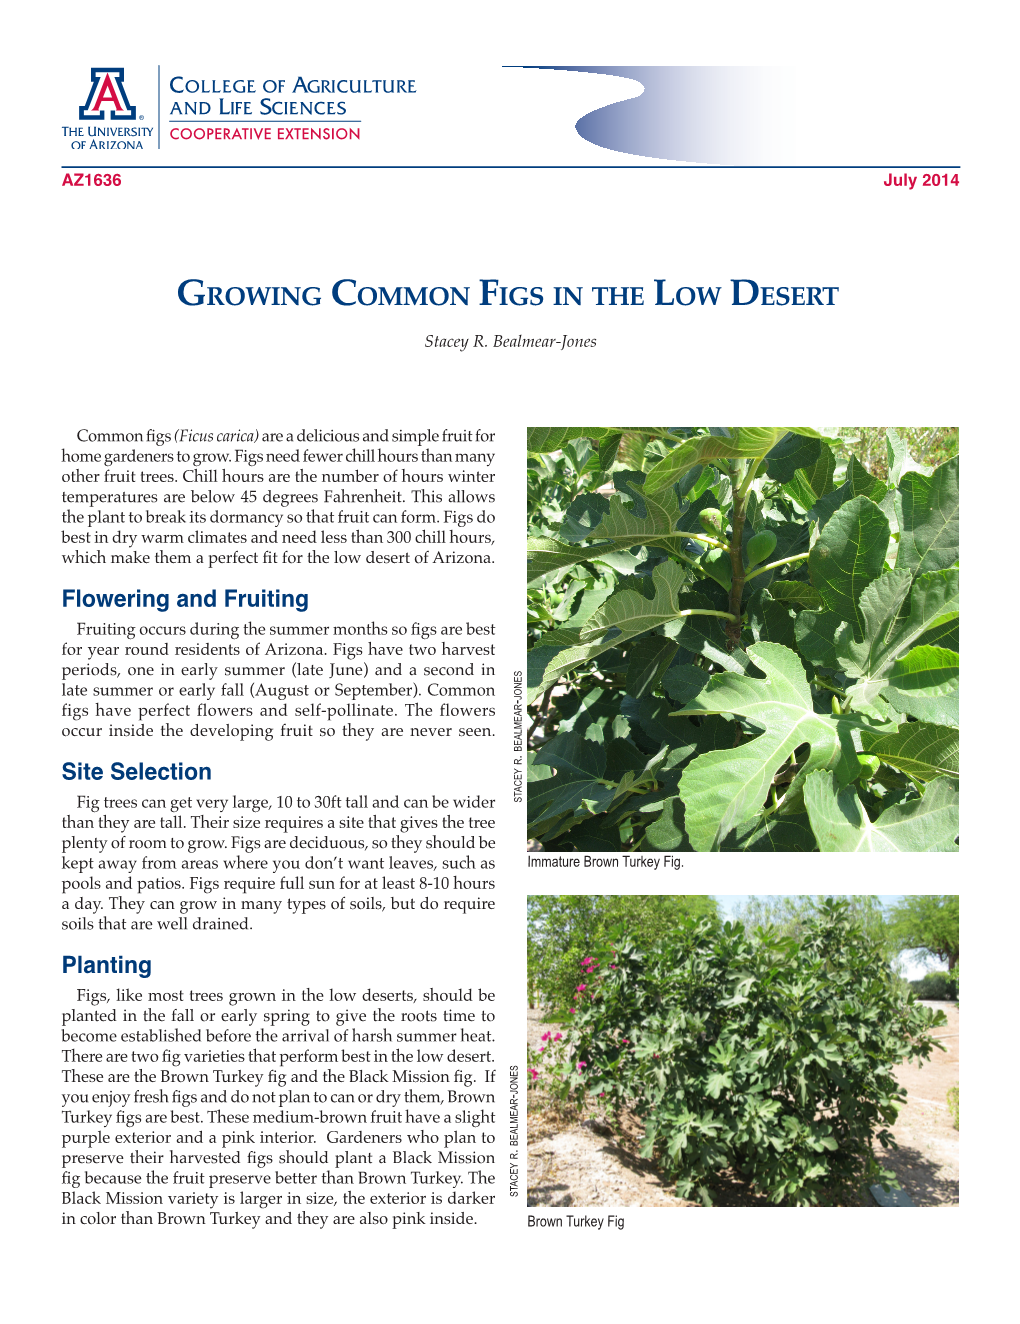 Growing Common Figs in the Low Desert Stacey R